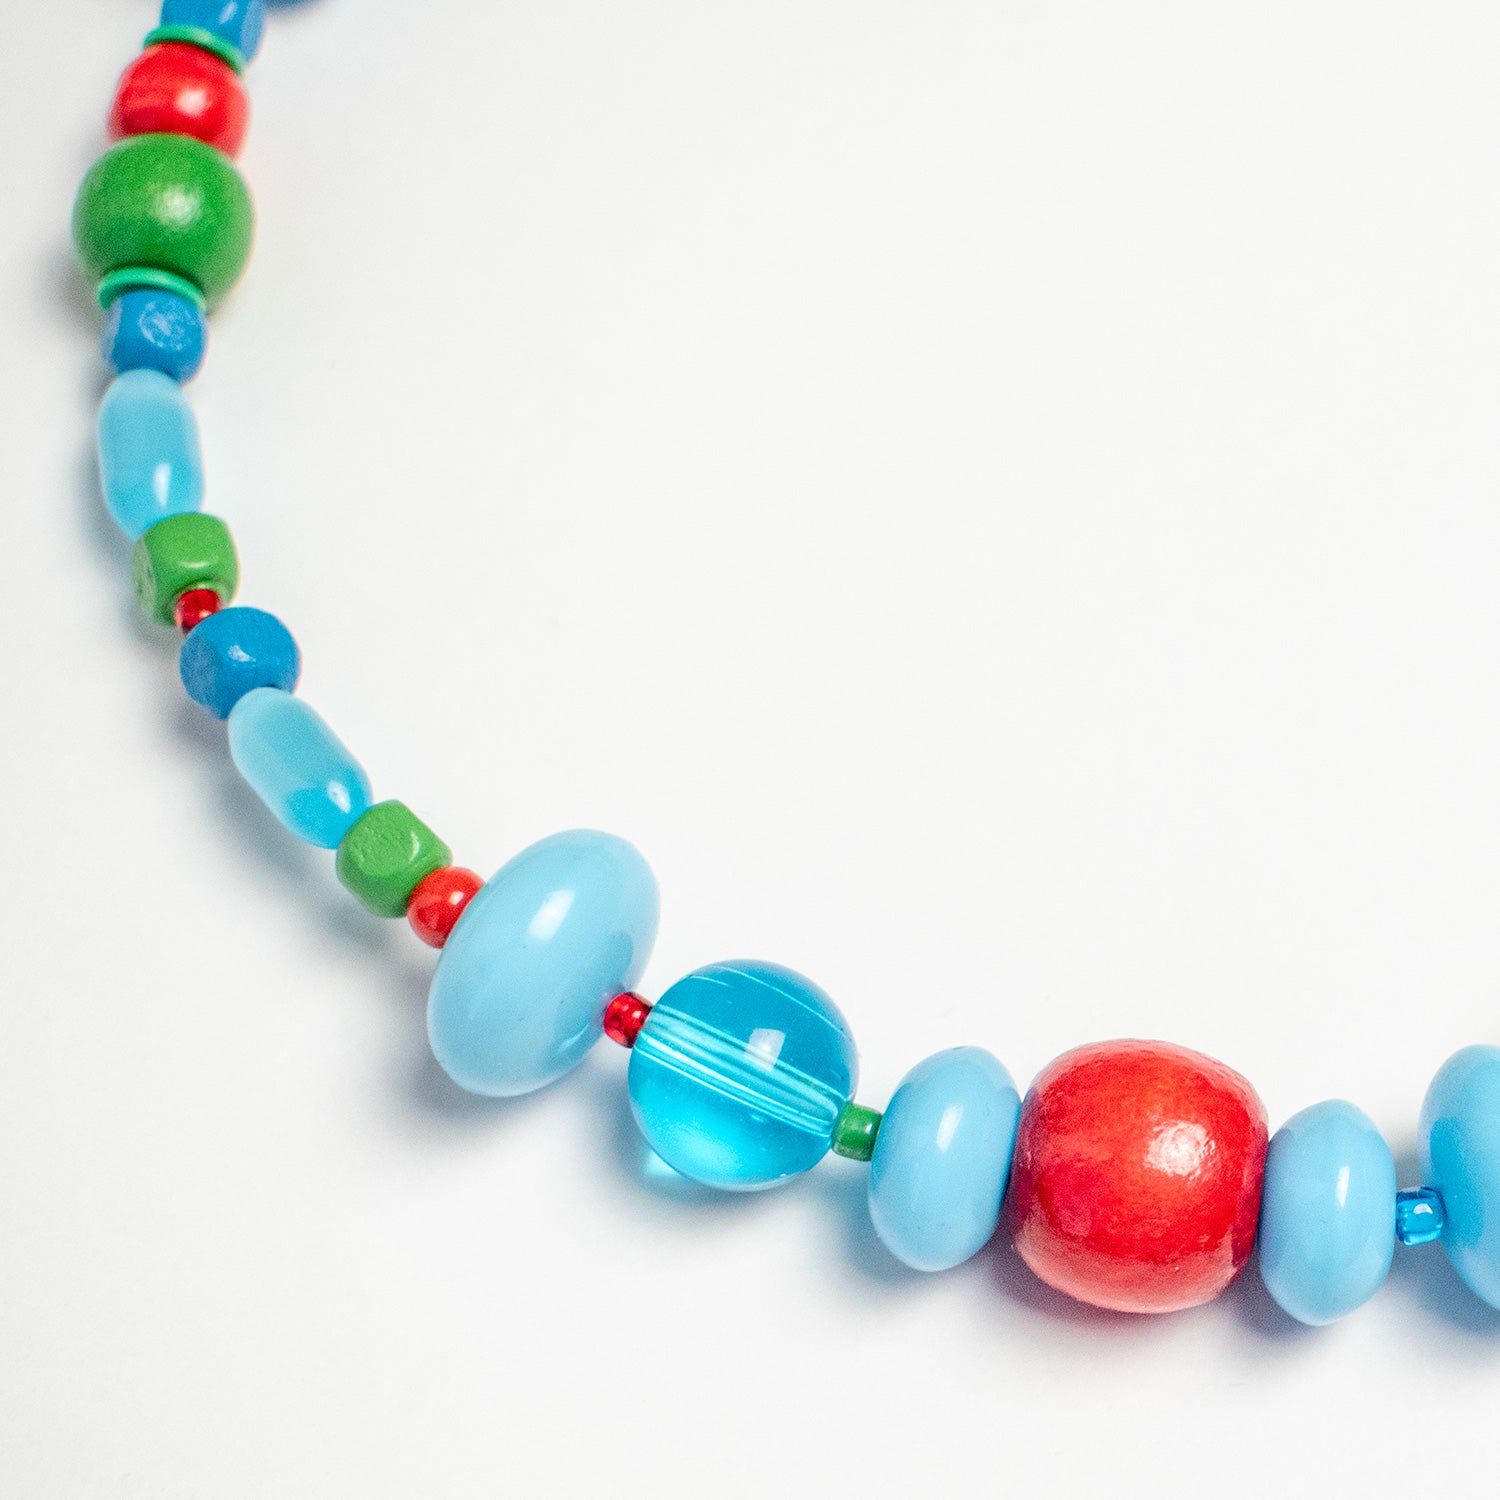 Blue Bubblegum Glass and Wood Bead Necklace